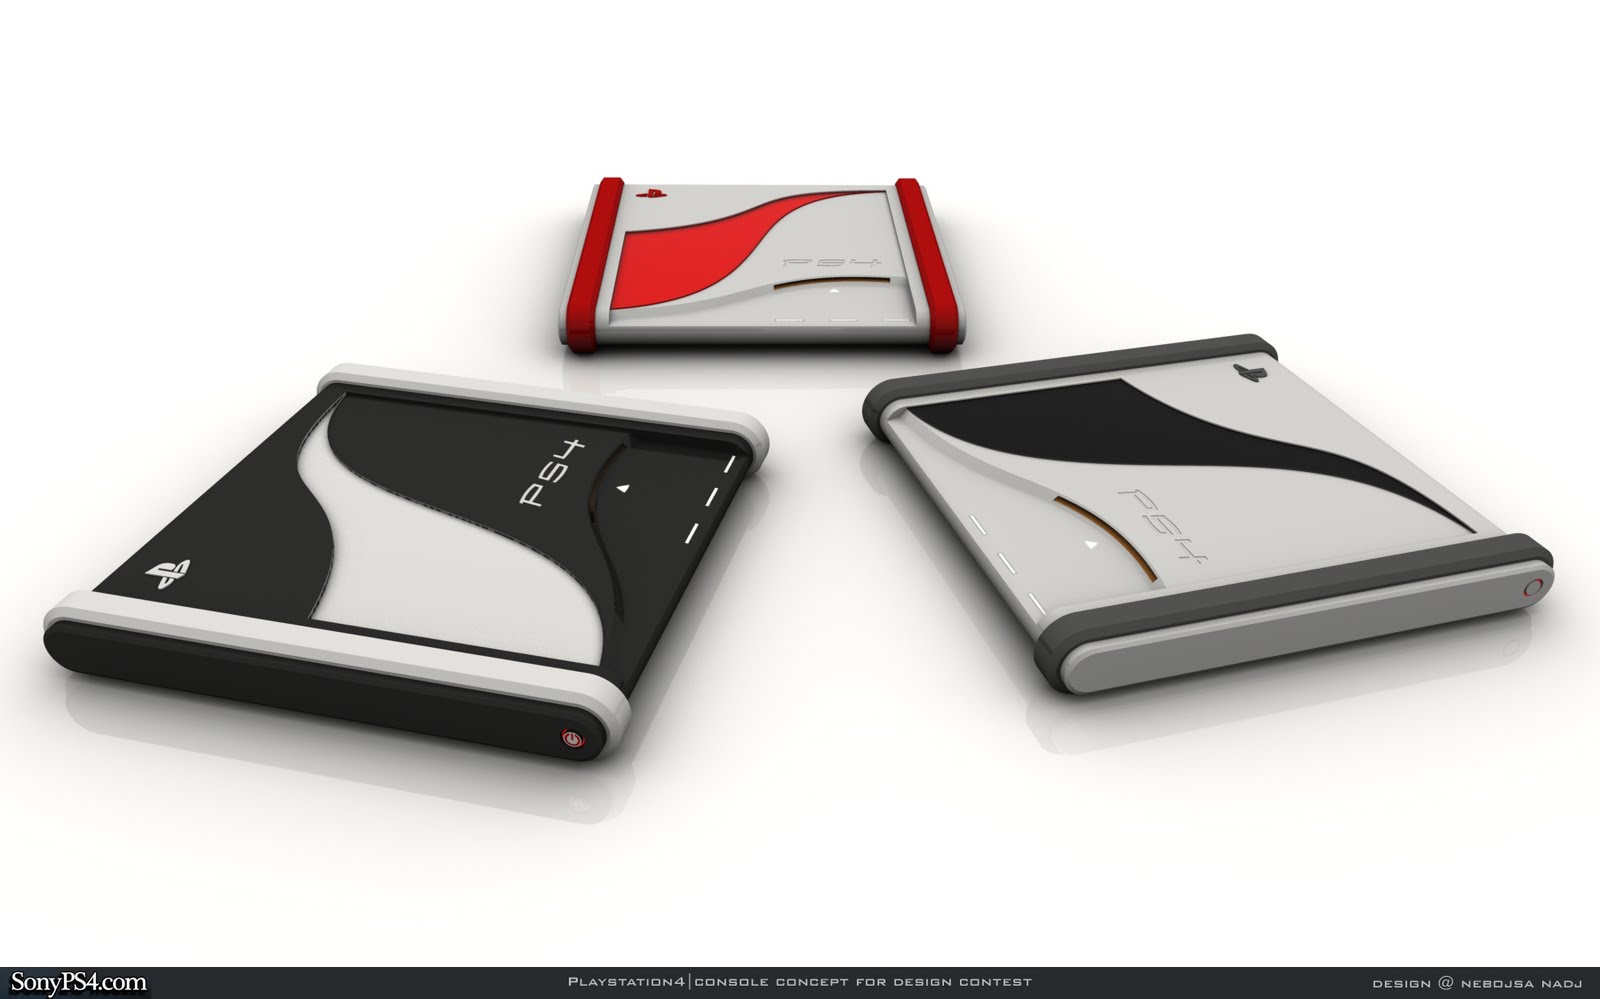 New Sony Playstation 4 Concepts | Sony PS4